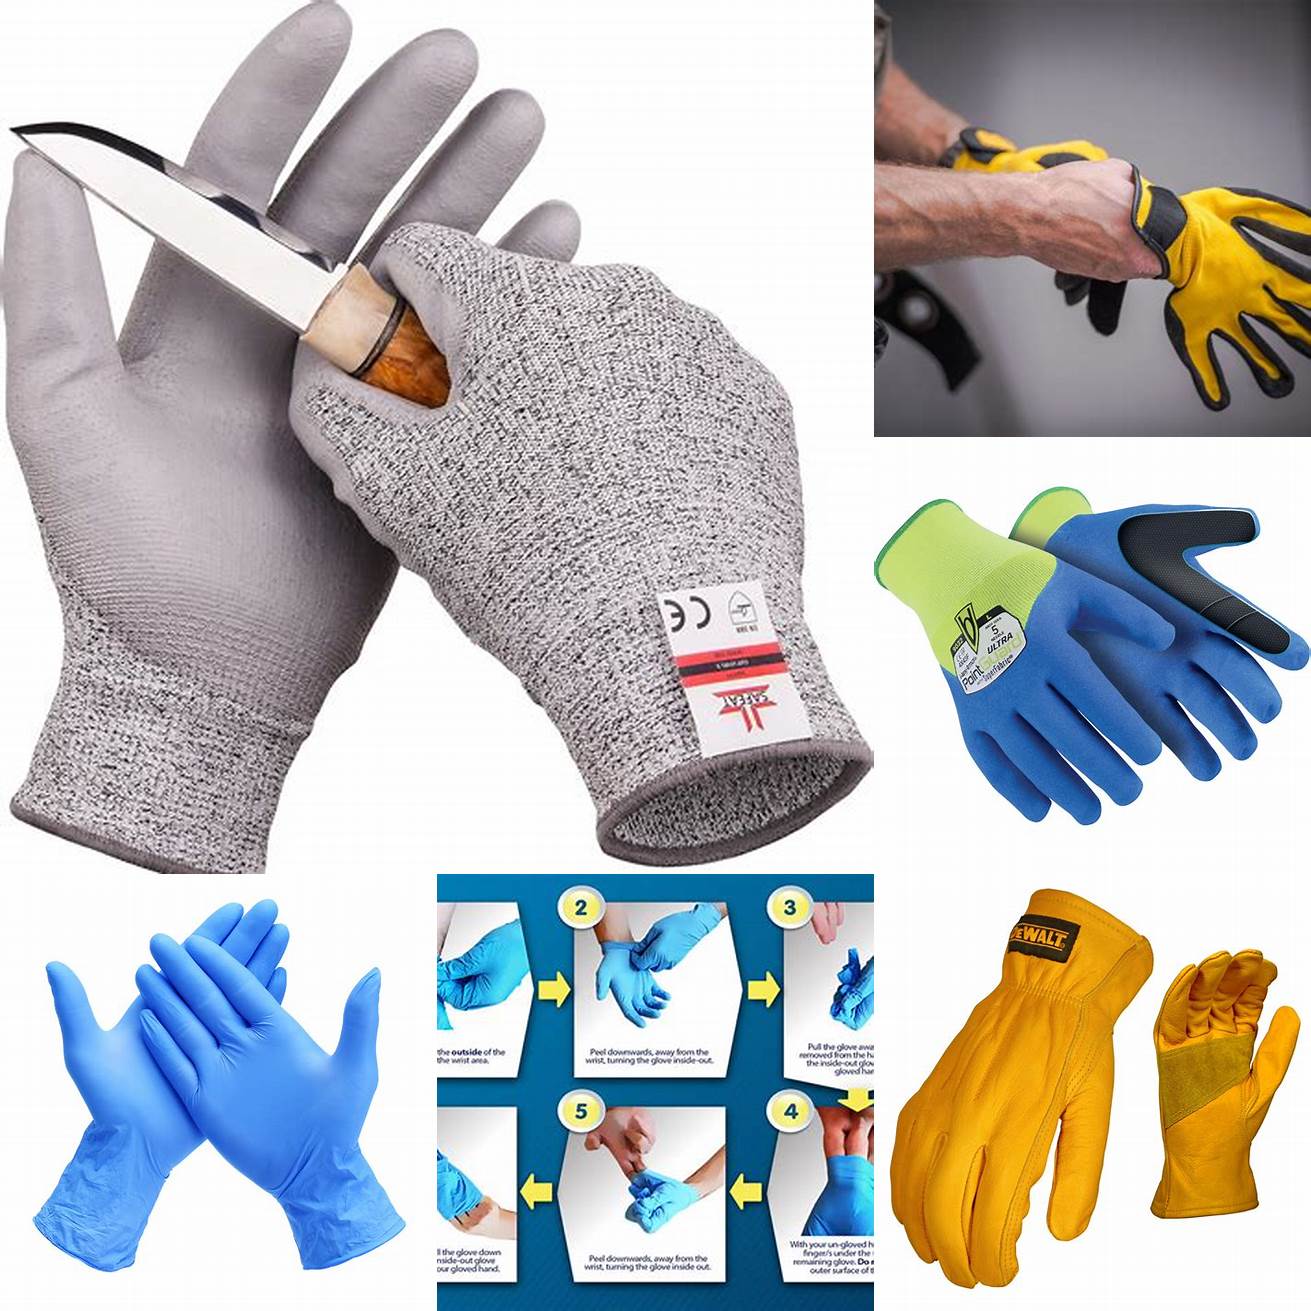 Use protective gloves